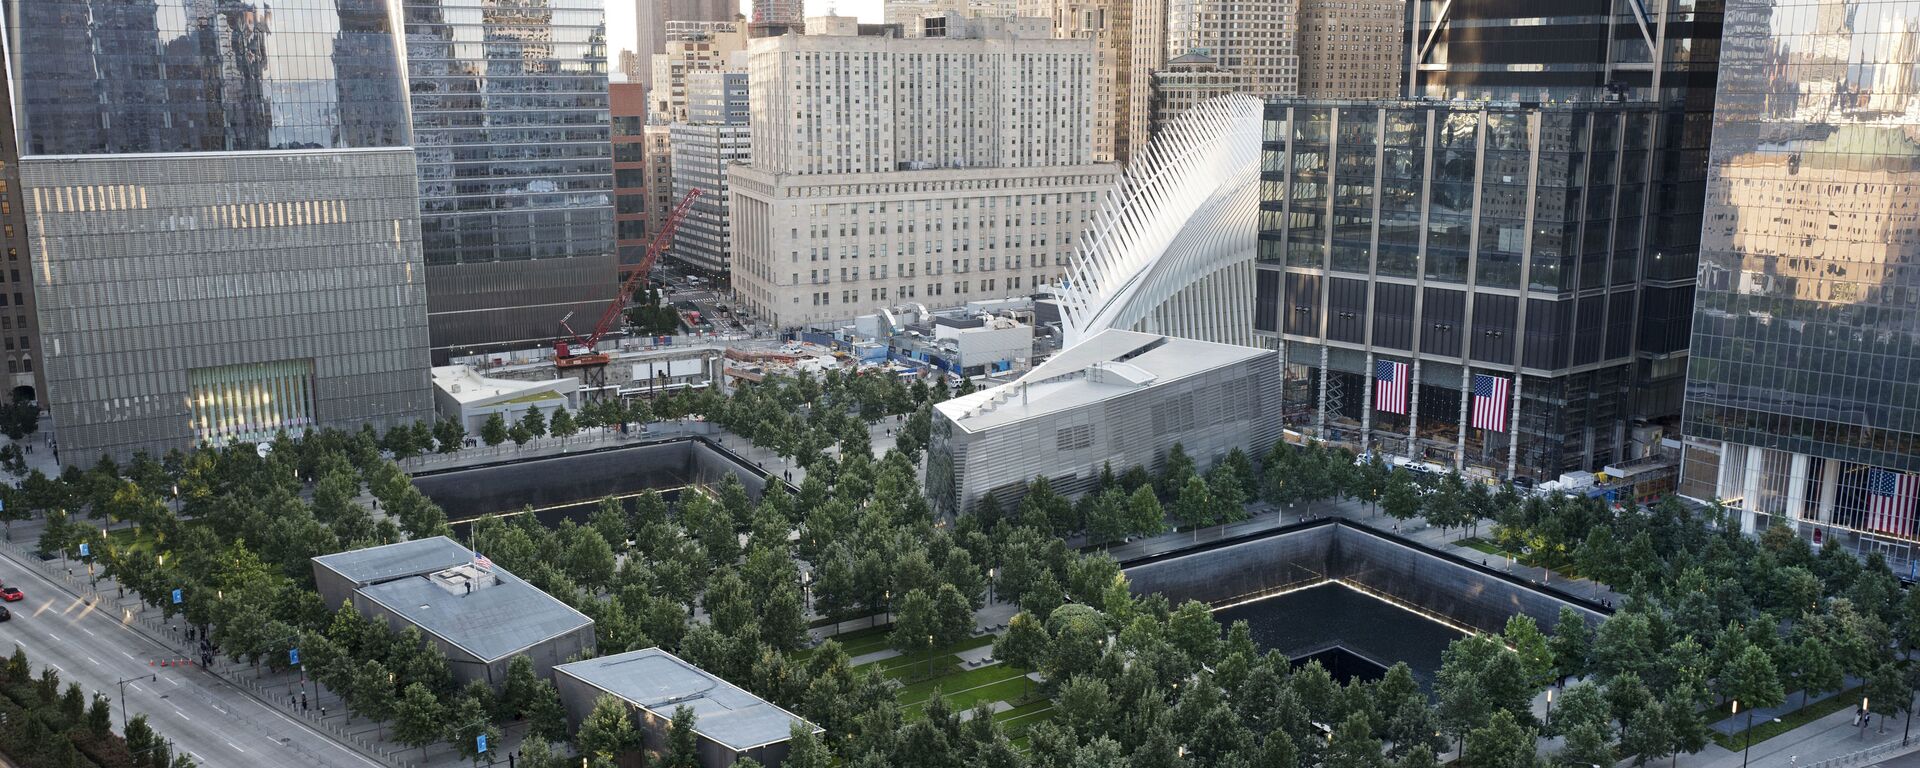 The National September 11 Memorial and Museum are set for a memorial service, Monday, Sept. 11, 2017, in New York. Thousands of 9/11 victims' relatives, survivors, rescuers and others are expected to gather Monday at the World Trade Center to remember the deadliest terror attack on American soil. Nearly 3,000 people died when hijacked planes slammed into the trade center, the Pentagon and a field near Shanksville, Pa., on Sept. 11, 2001.  - Sputnik International, 1920, 08.09.2021